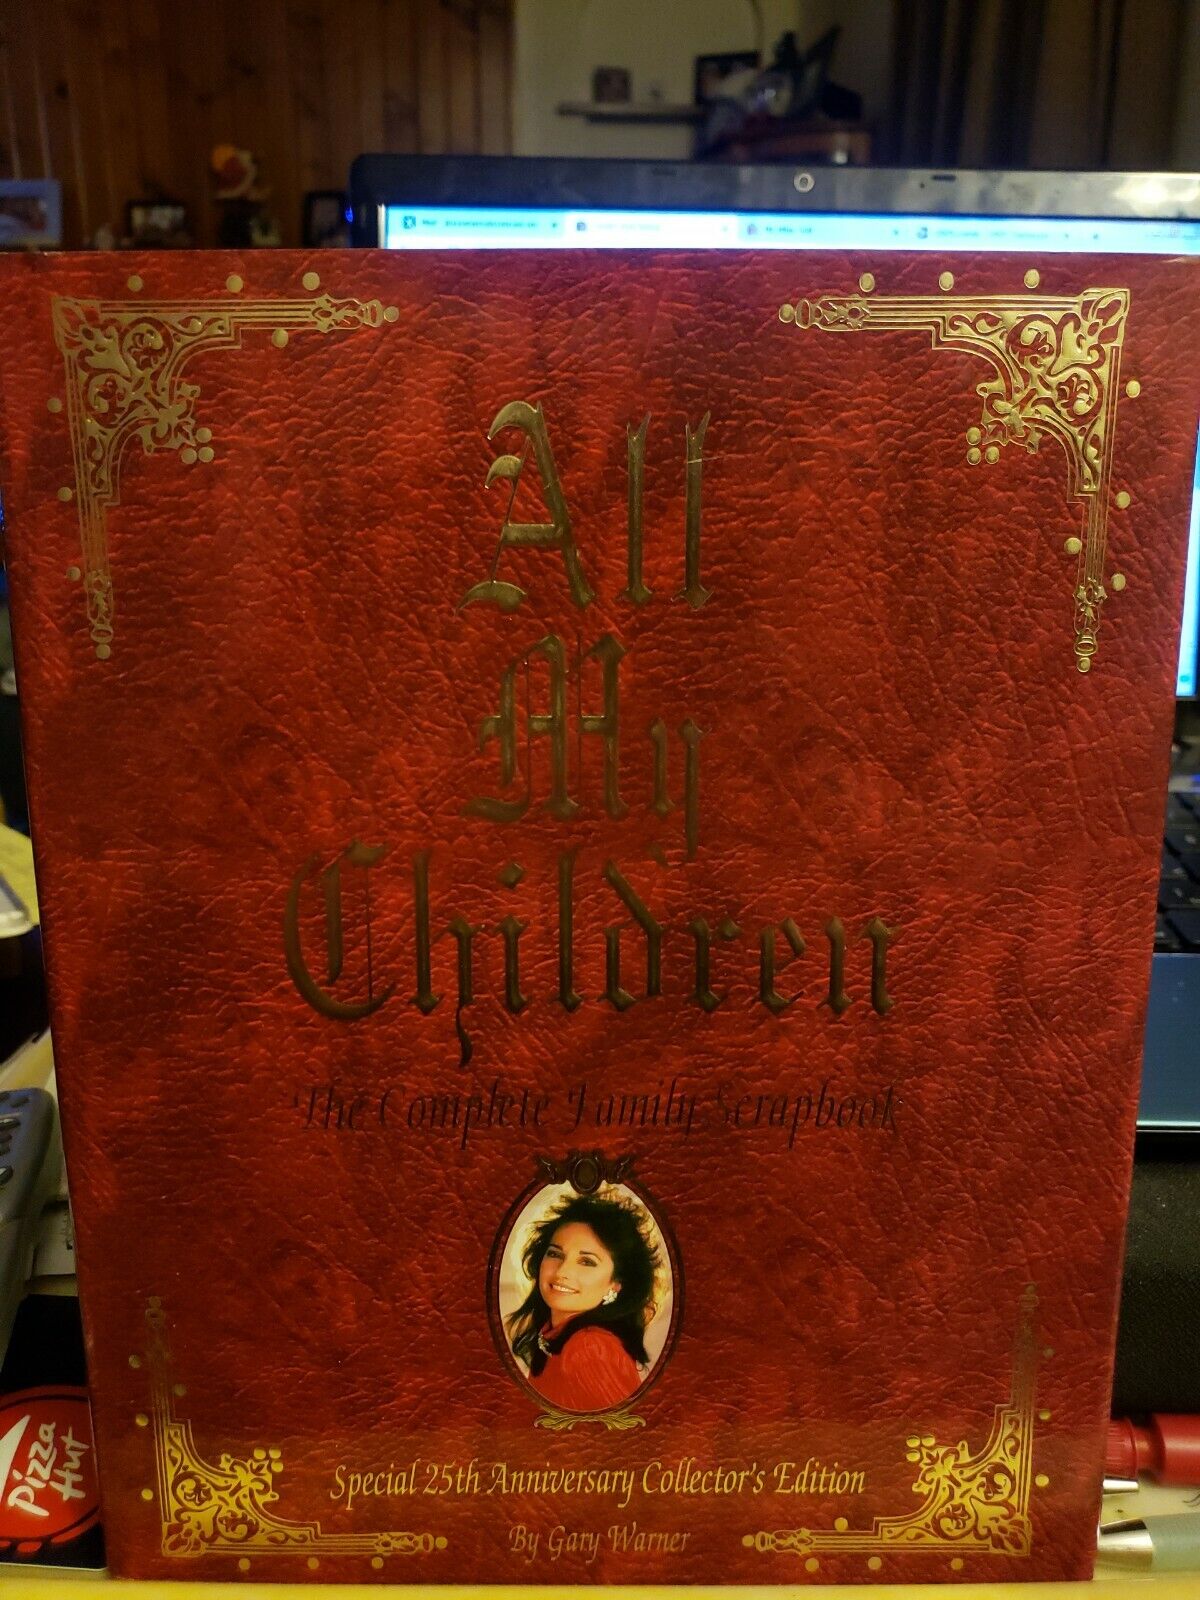 ALL MY CHILDREN -*THE COMPLETE FAMILY SCRAPBOOK - SPECIAL - 25th ANN EDITION 